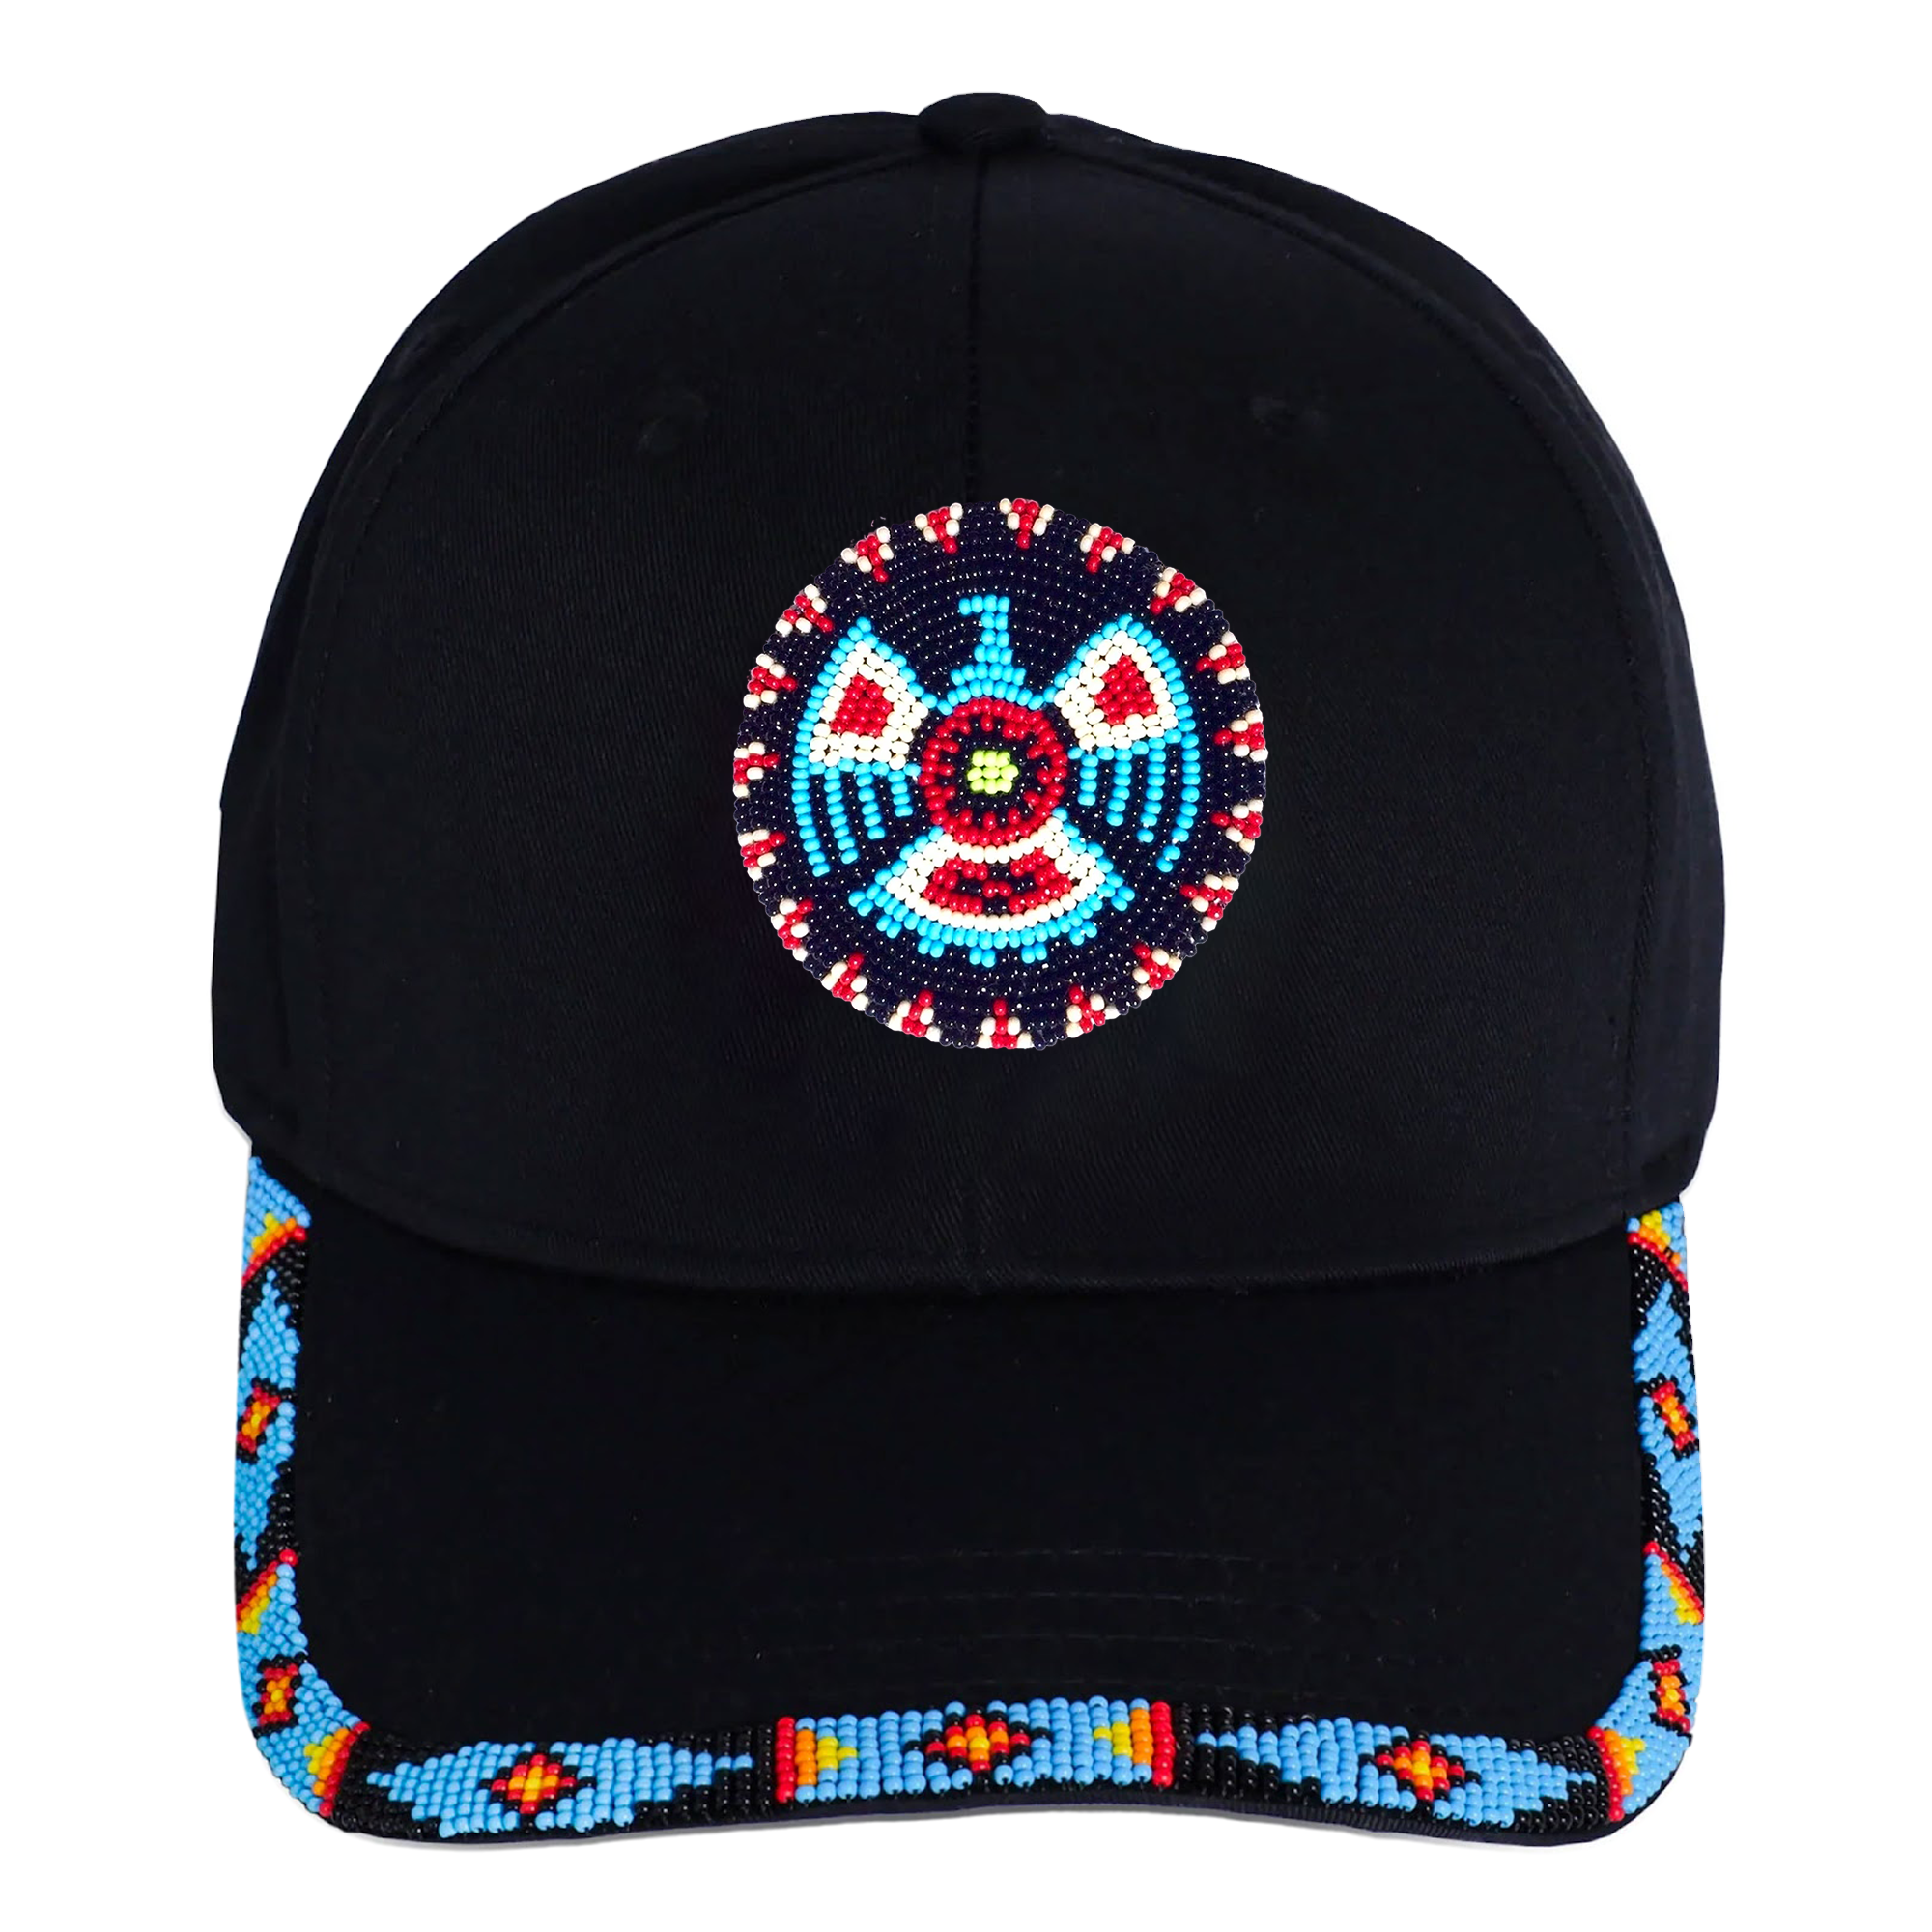 Thunderbird Handmade Baseball Cap  With Patch And A Colorful Beaded Brim Native American Style Beaded